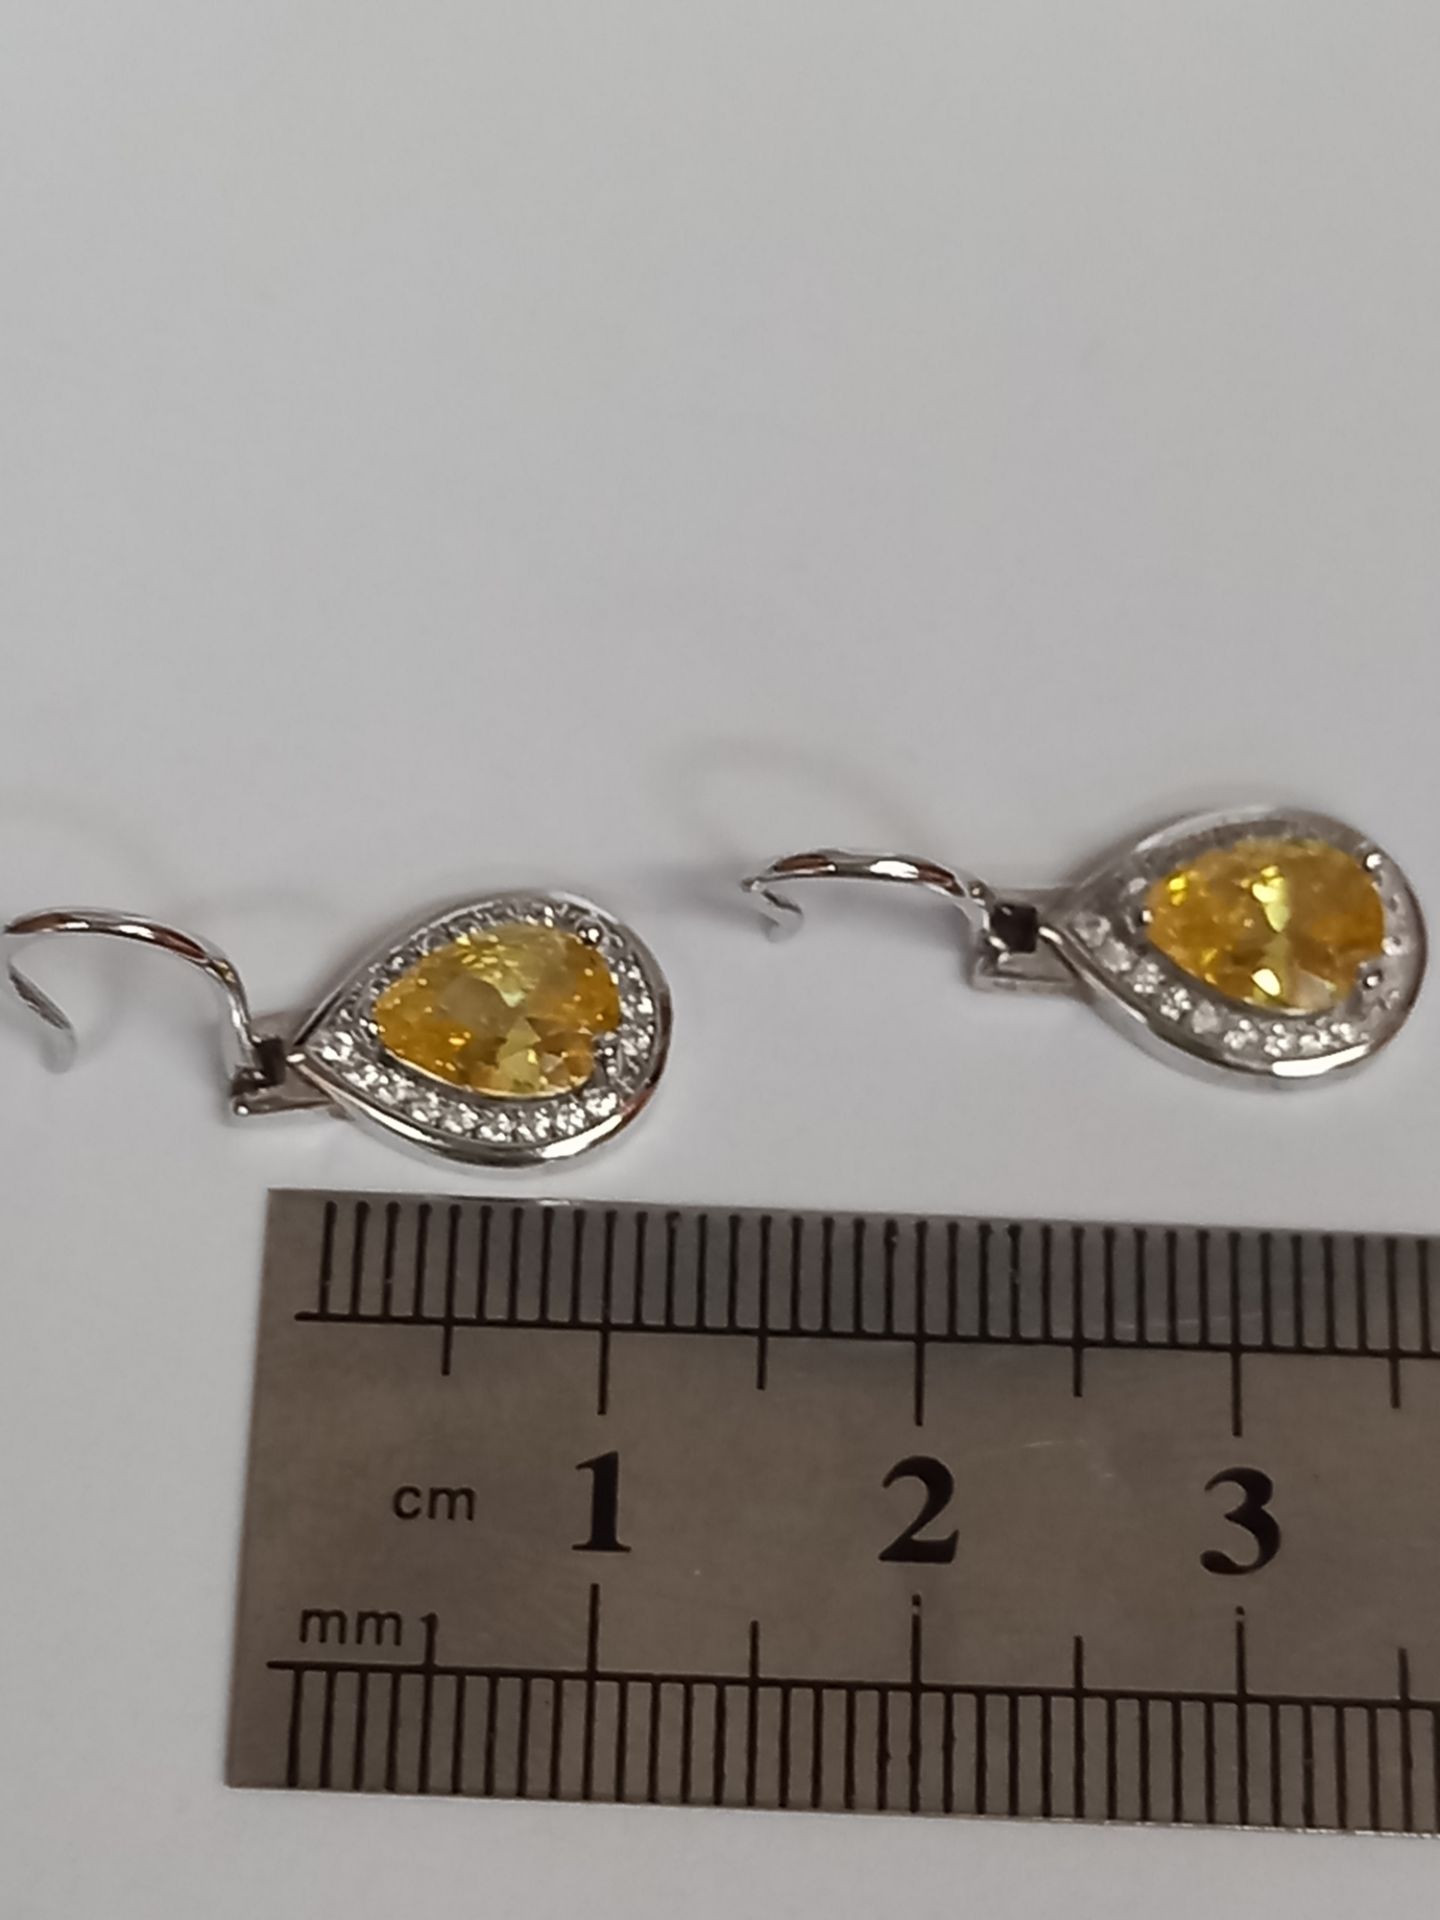 SILVER HOOK EARRINGS WITH CUBIC ZIRCONIA &YELLOW STONE - Image 4 of 4